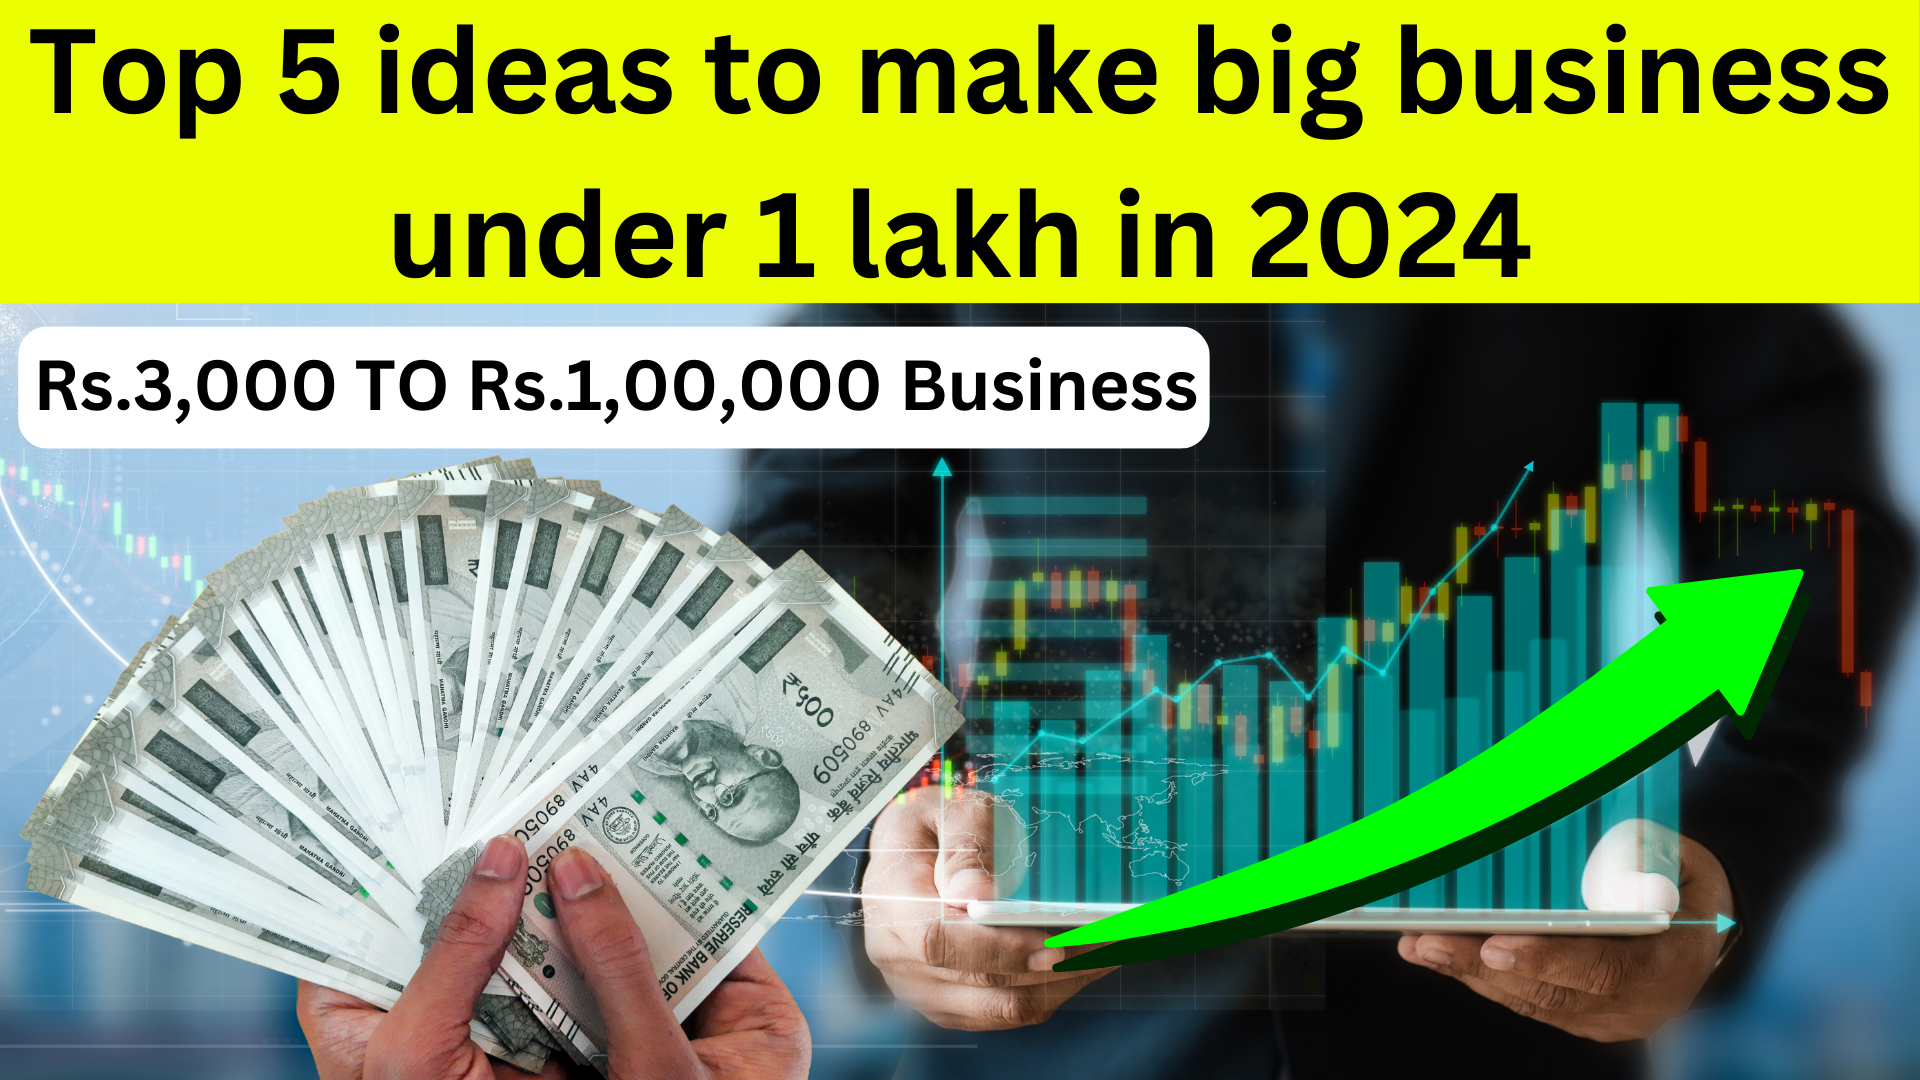 Top 5 ideas to make big business under 1 lakh in 2024